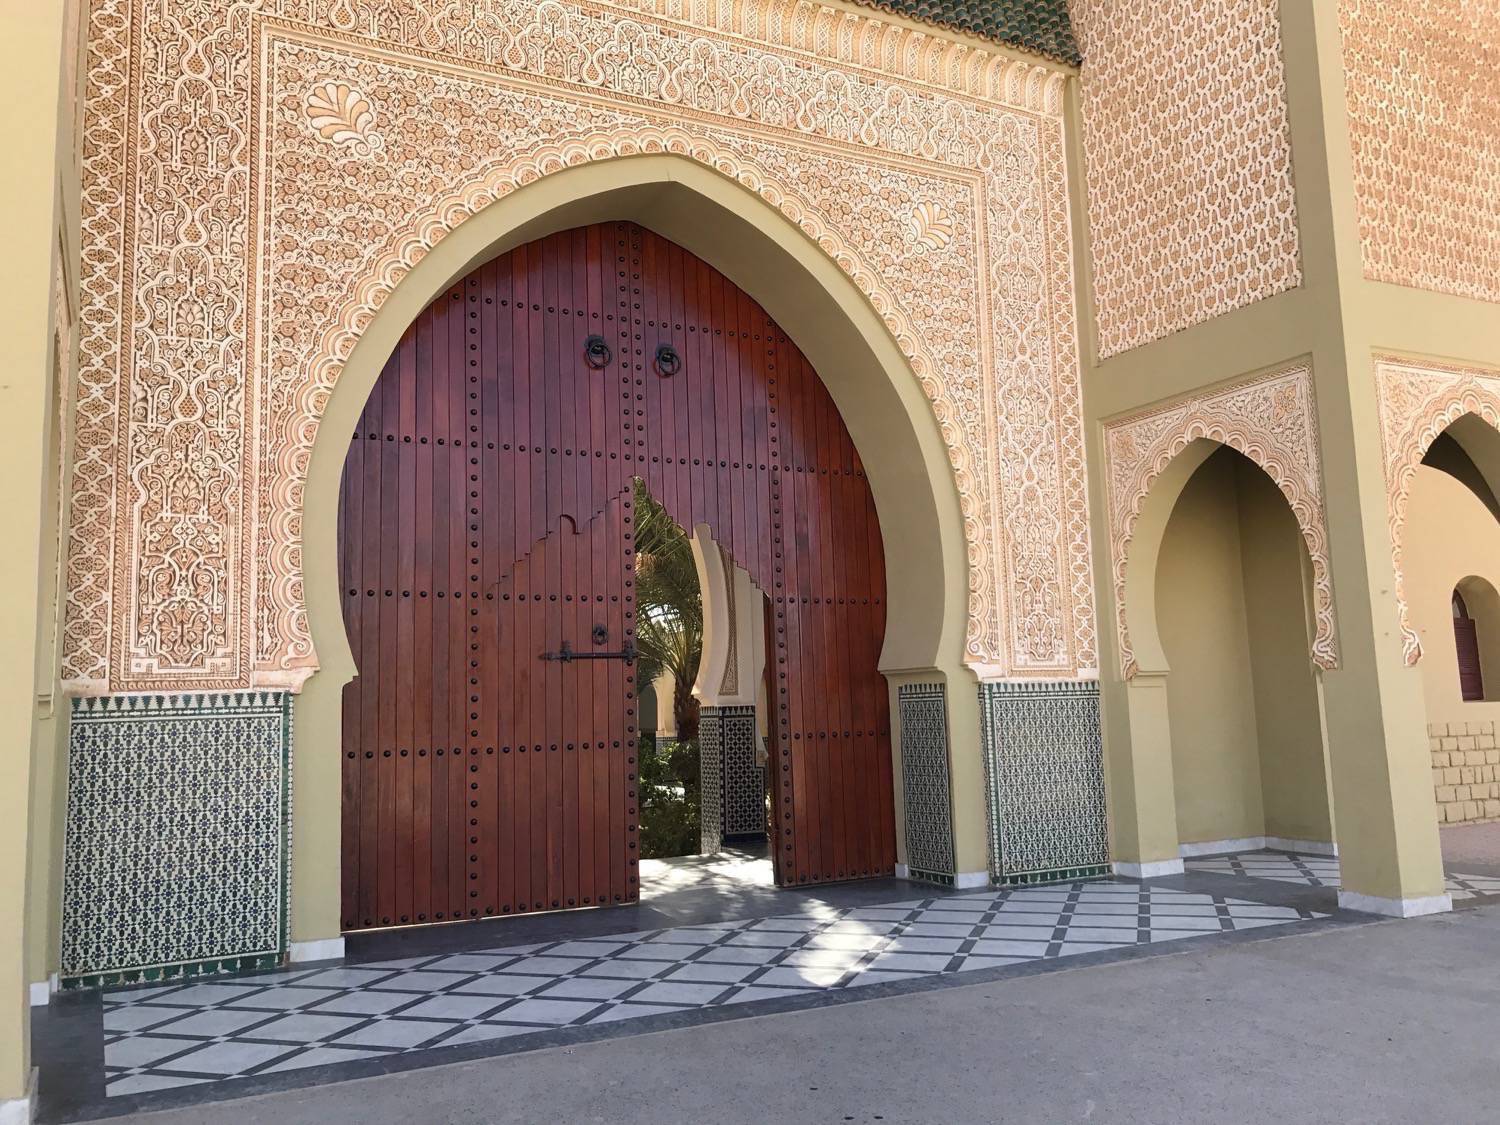 The main entrance featuring an imposing wooden gate and a carved archway  leading to the Moulay Ali Cherif mausoleum complex